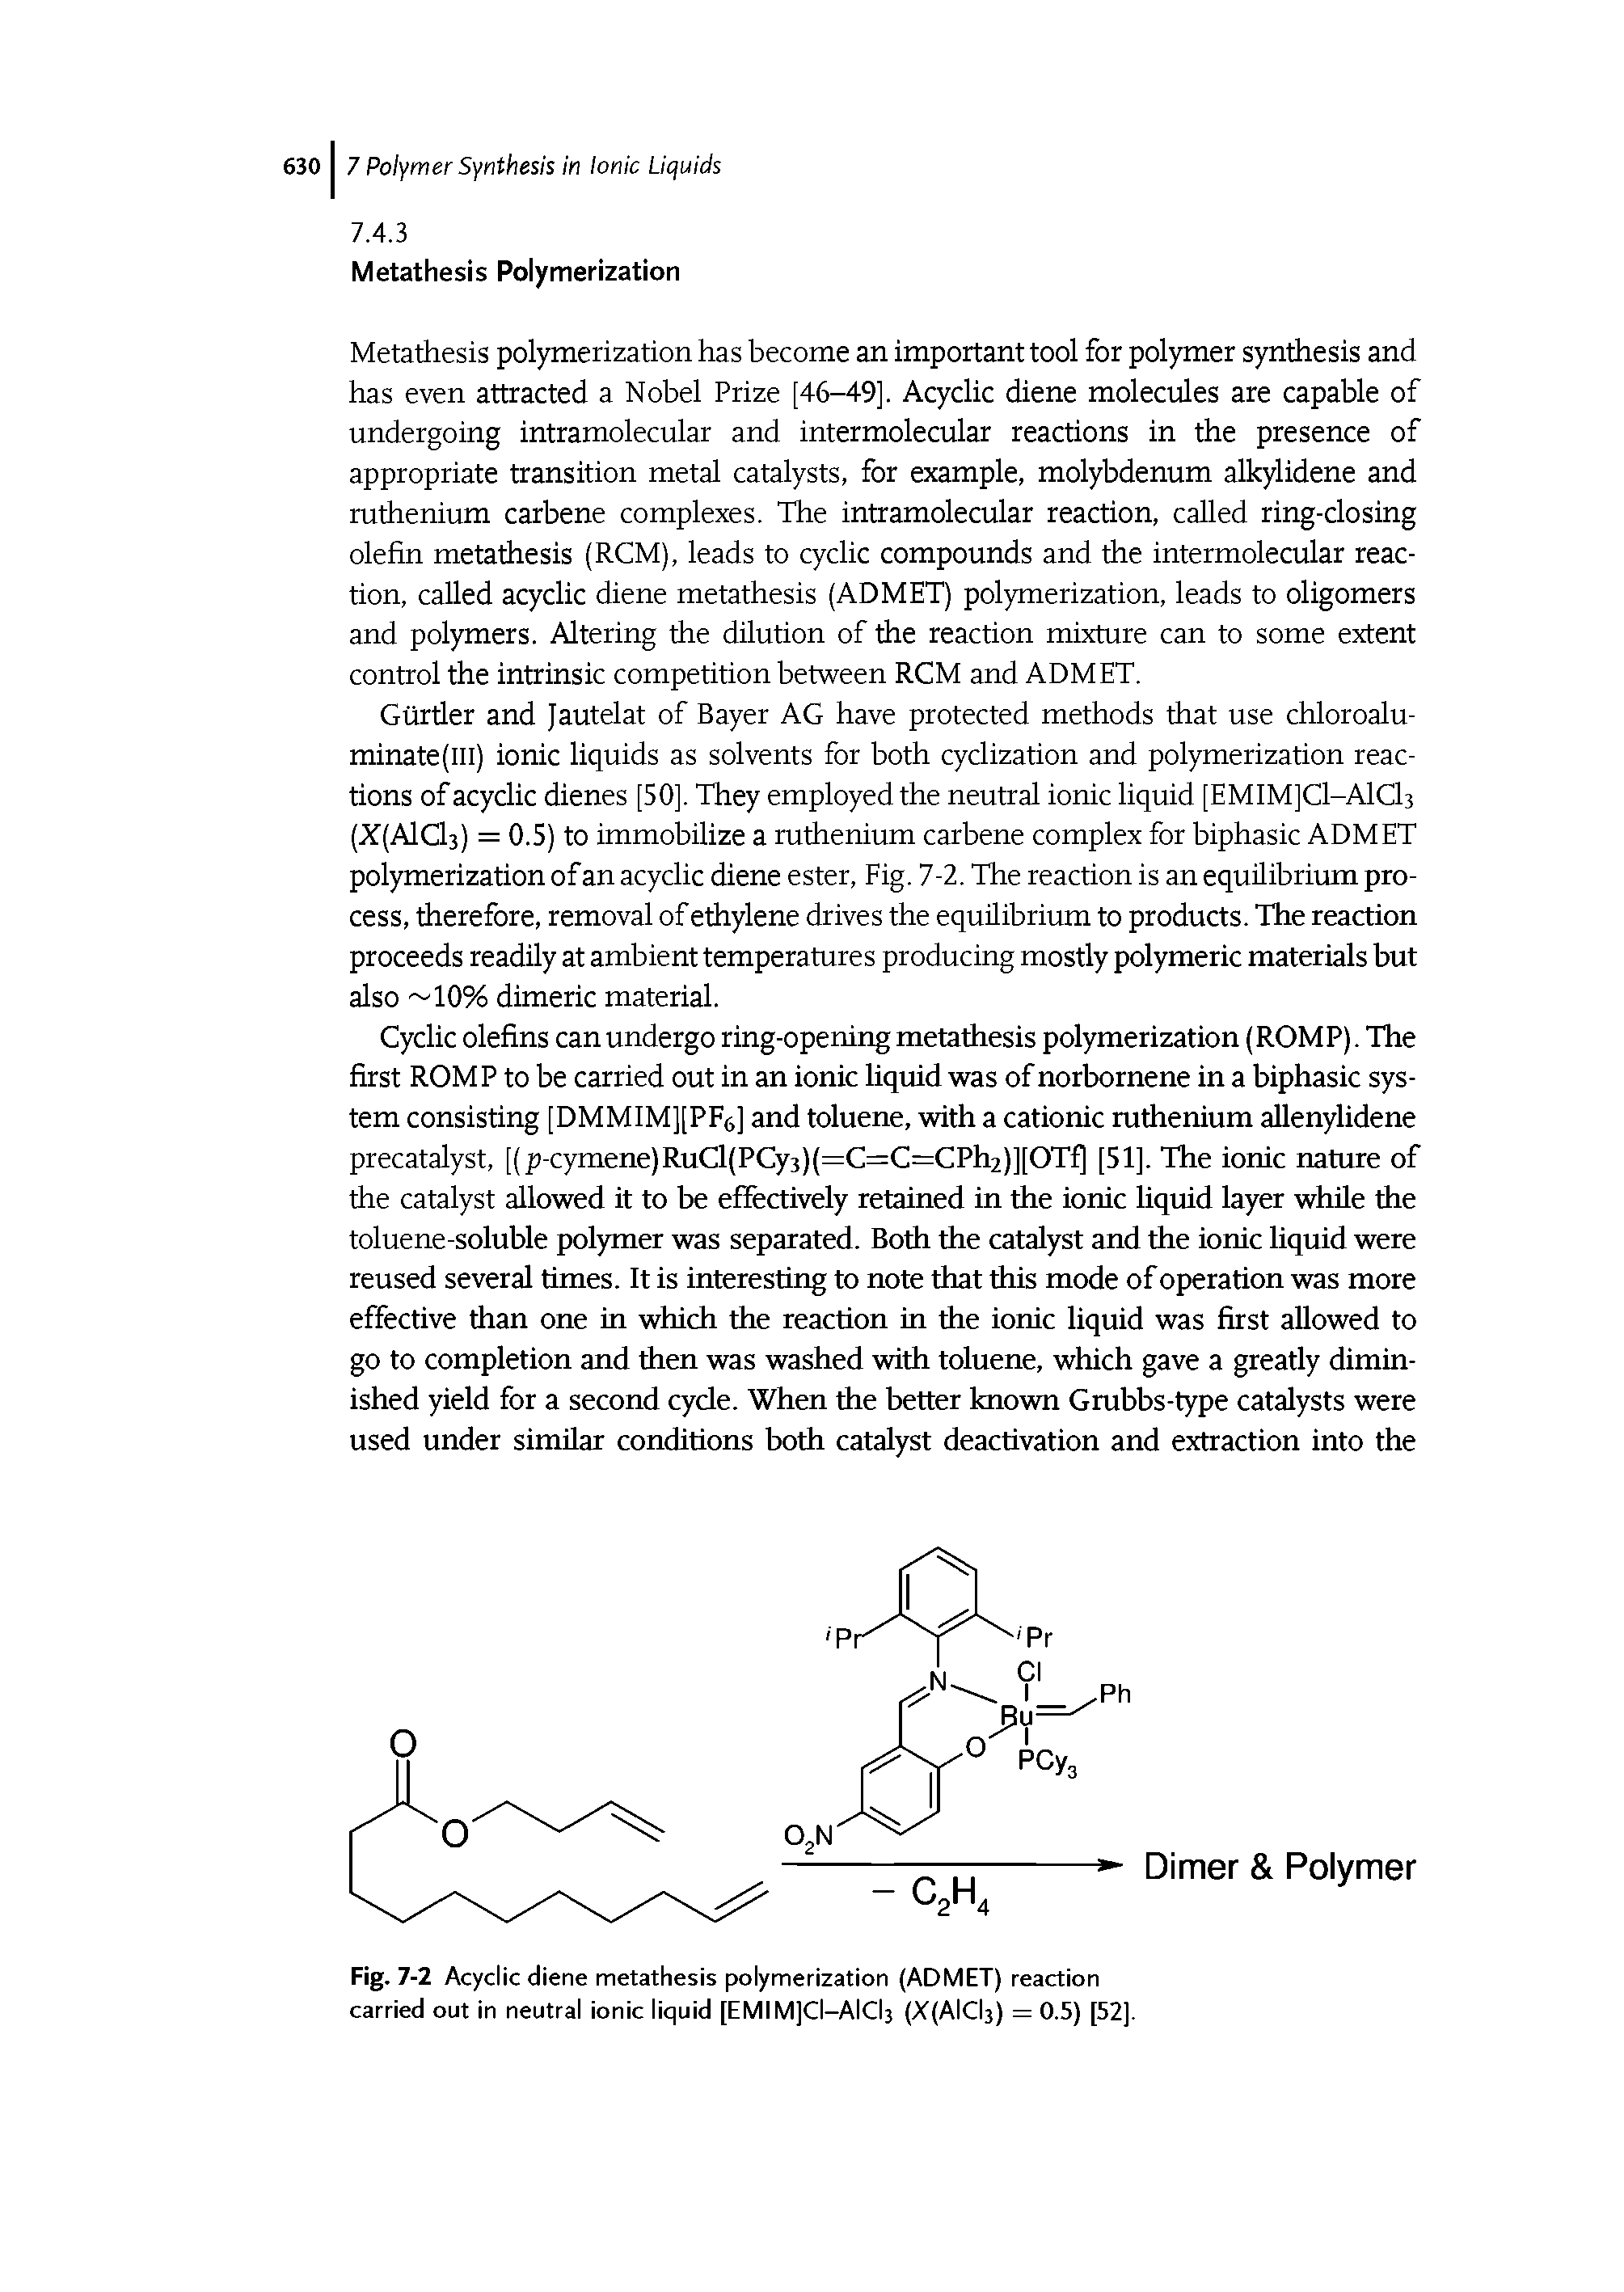 Fig. 7-2 Acyclic diene metathesis polymerization (ADMET) reaction carried out in neutral ionic liquid [EMIMJCl-AICb (- (AlCb) = 0.5) [52].